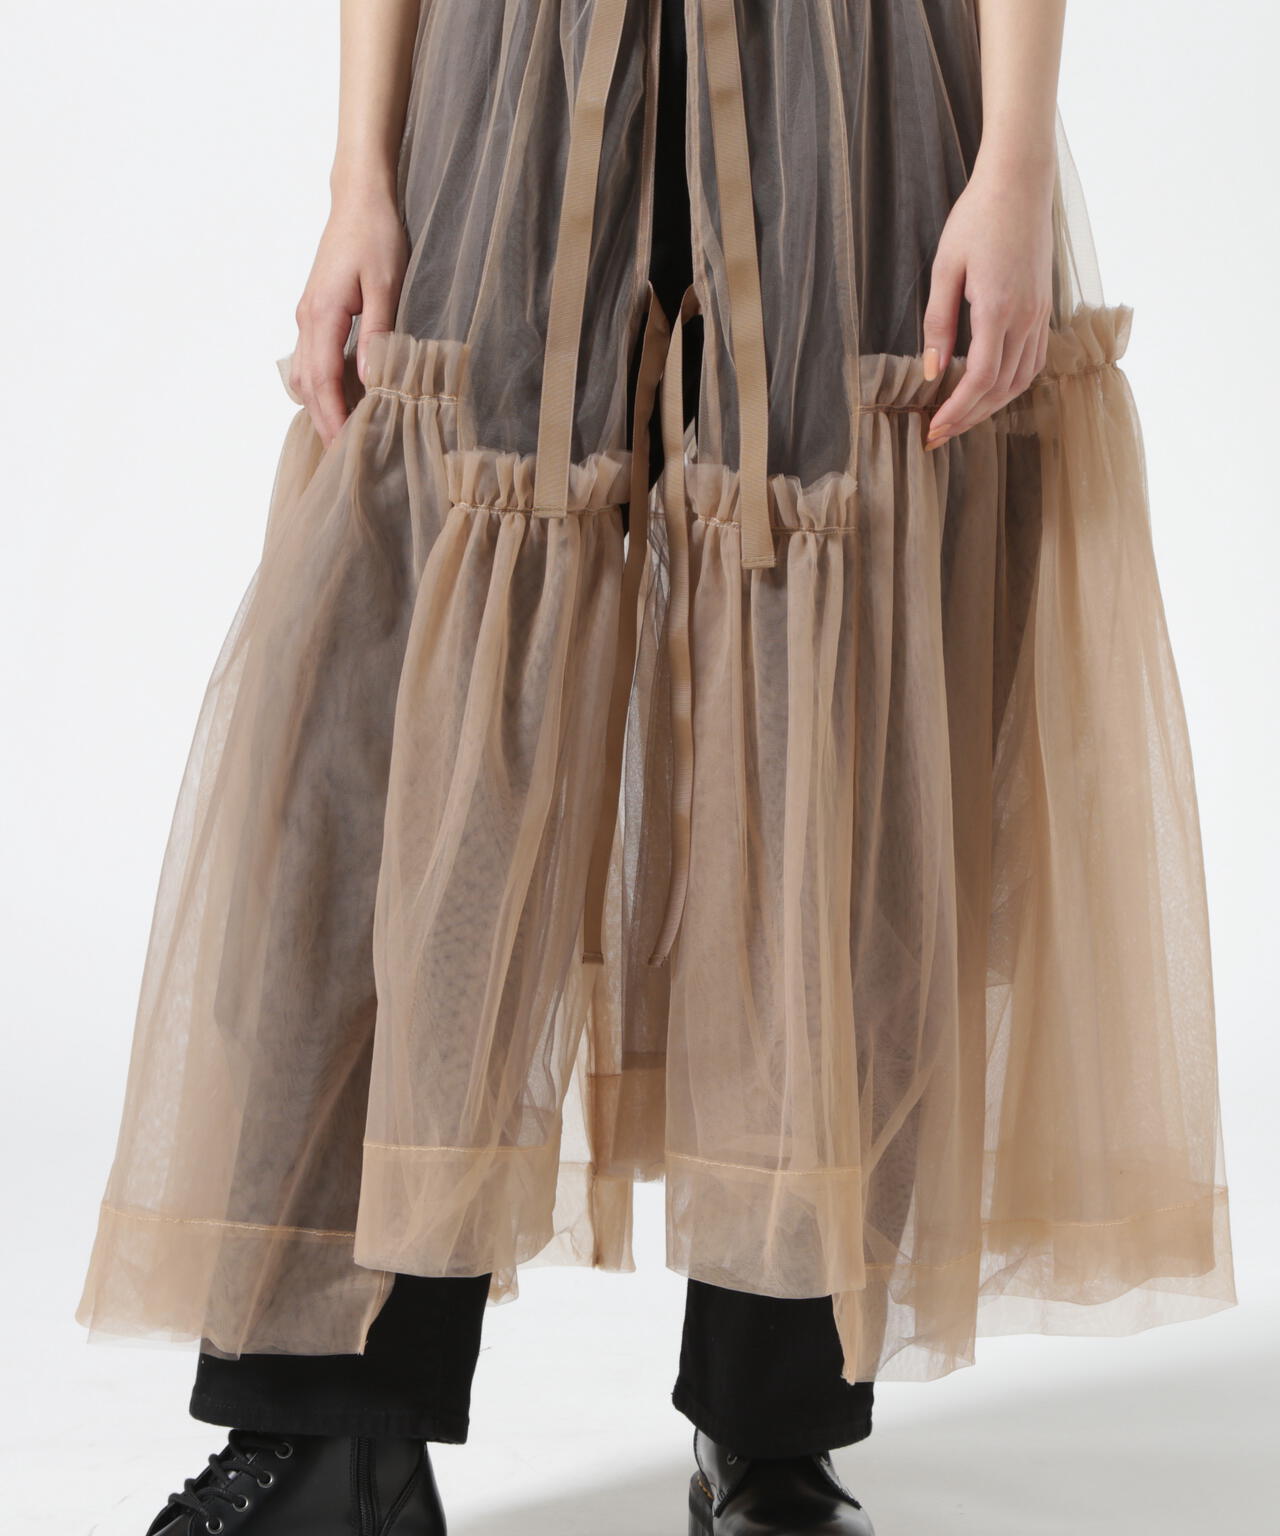 MAISON SPECIAL/メゾンスペシャル/Suspender Tulle Skirt